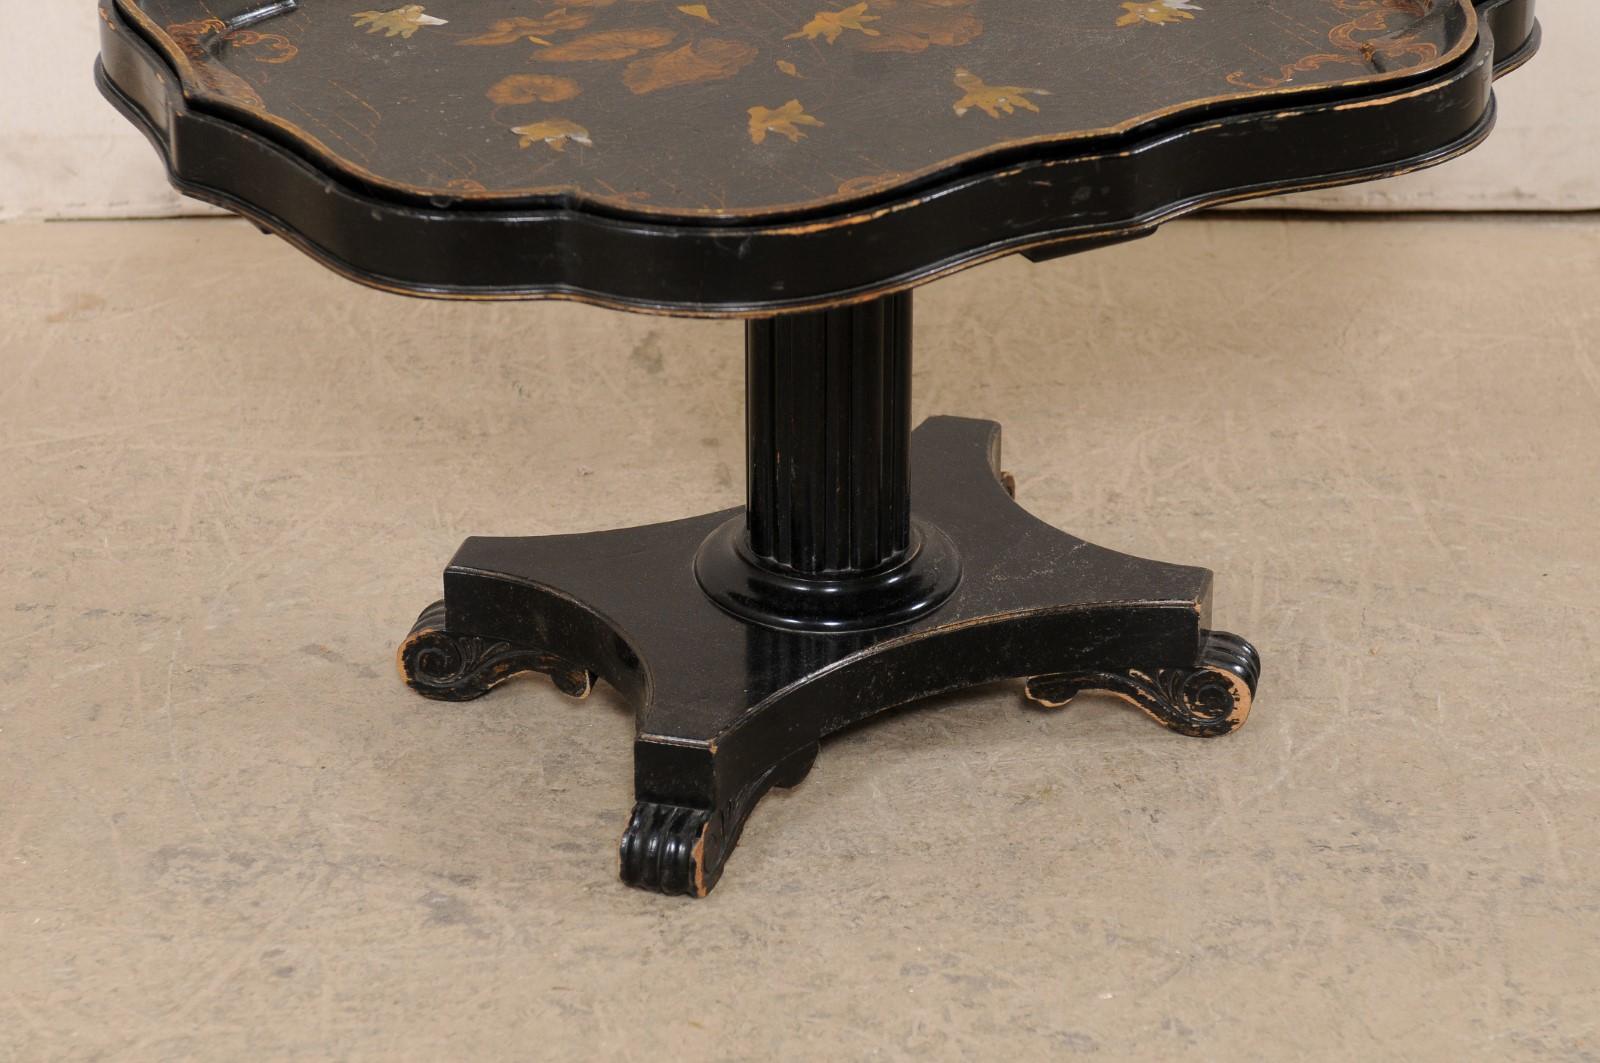 Antique English Chinoiserie Tray-Top Pedestal Coffee Table in Black and Gold In Good Condition For Sale In Atlanta, GA